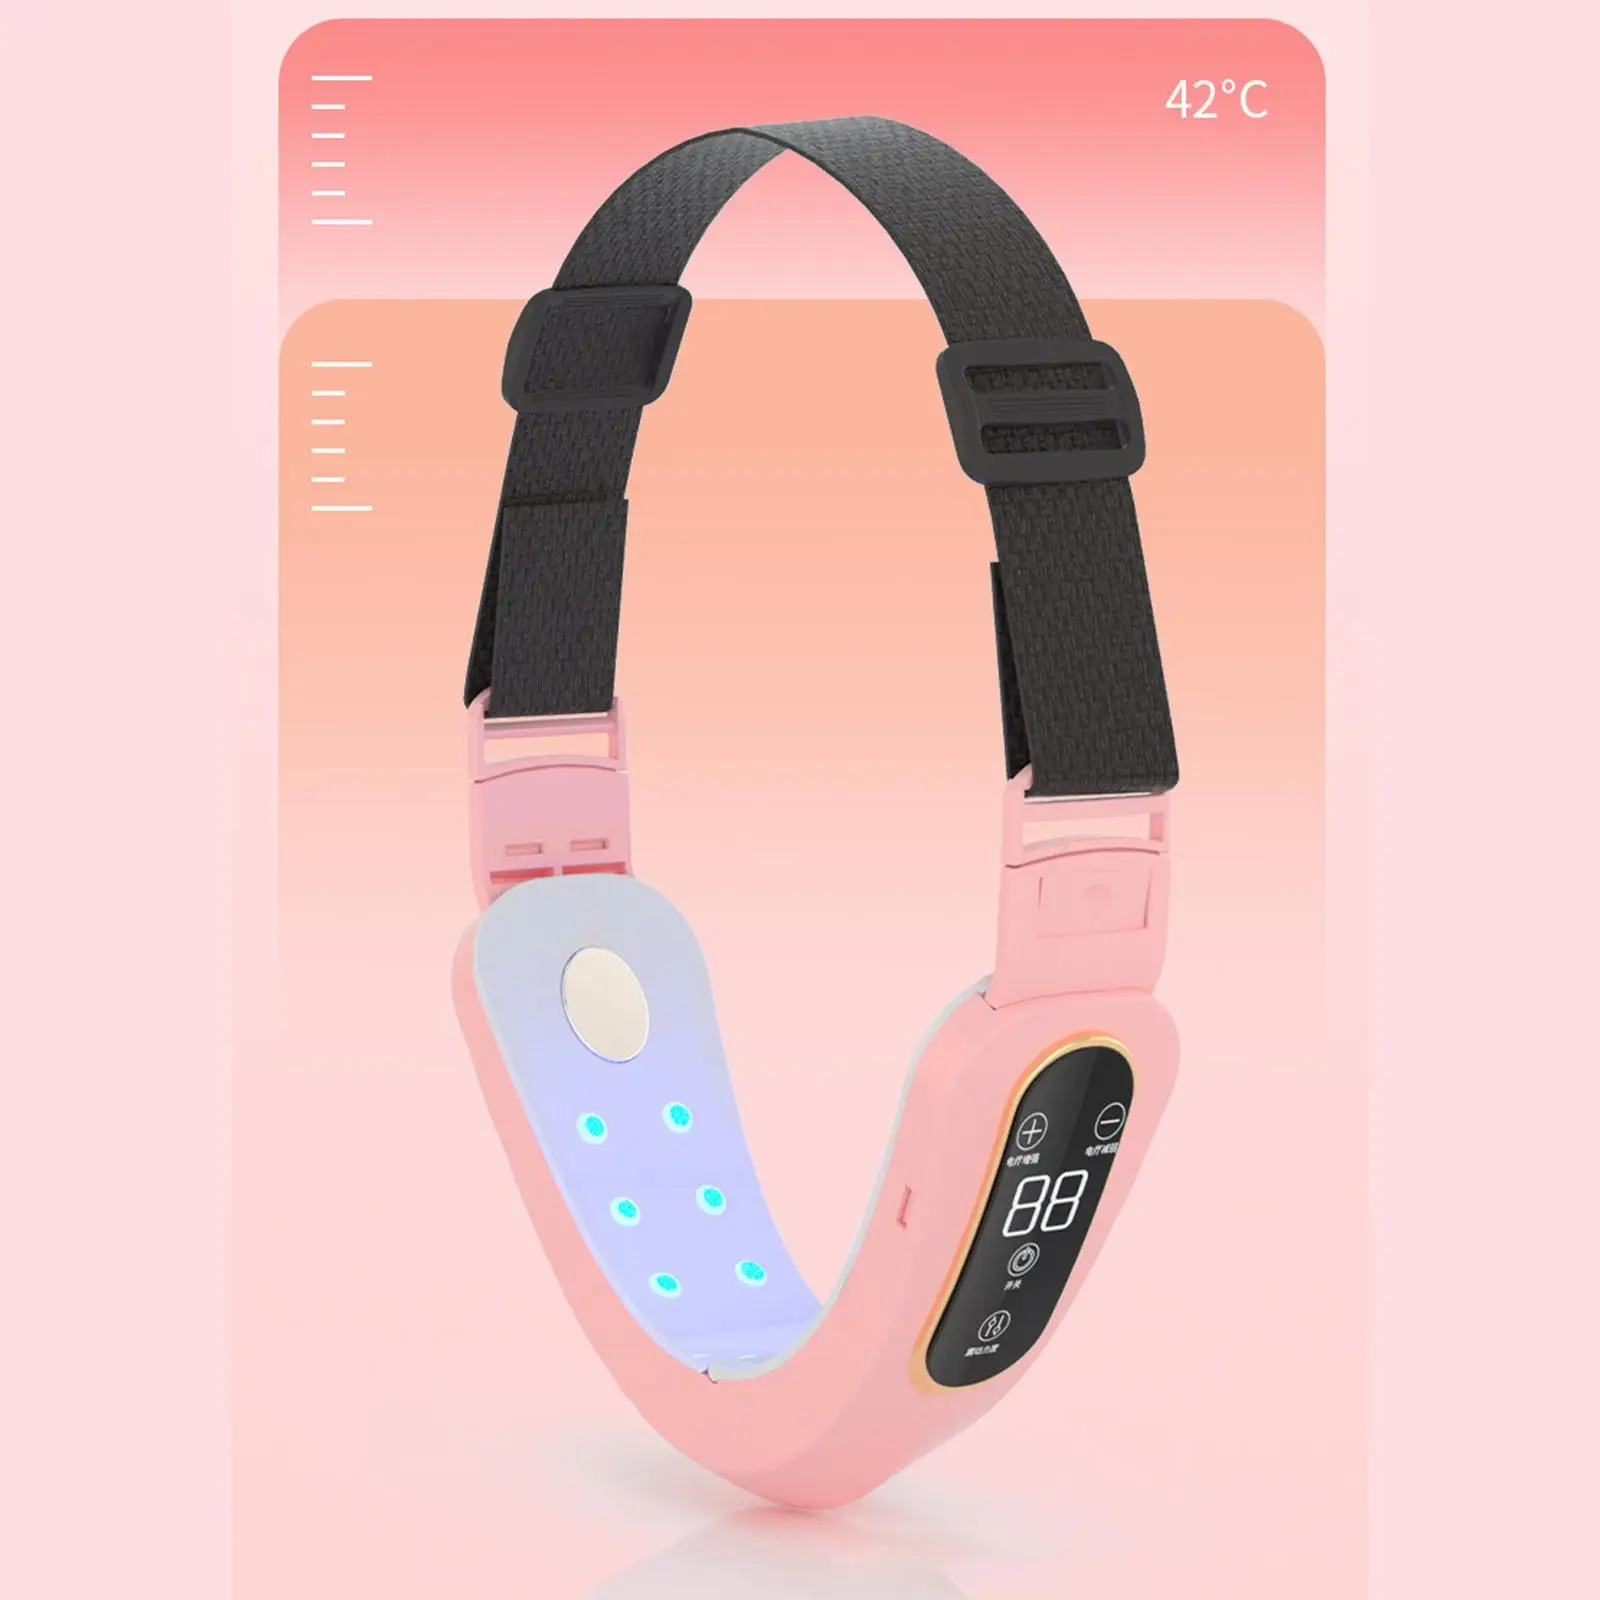 V Face Machine Beauty Device Red Blue Light Painless Electric Face Slimming Strap for Sagging Reduce Double Chin Firming Women